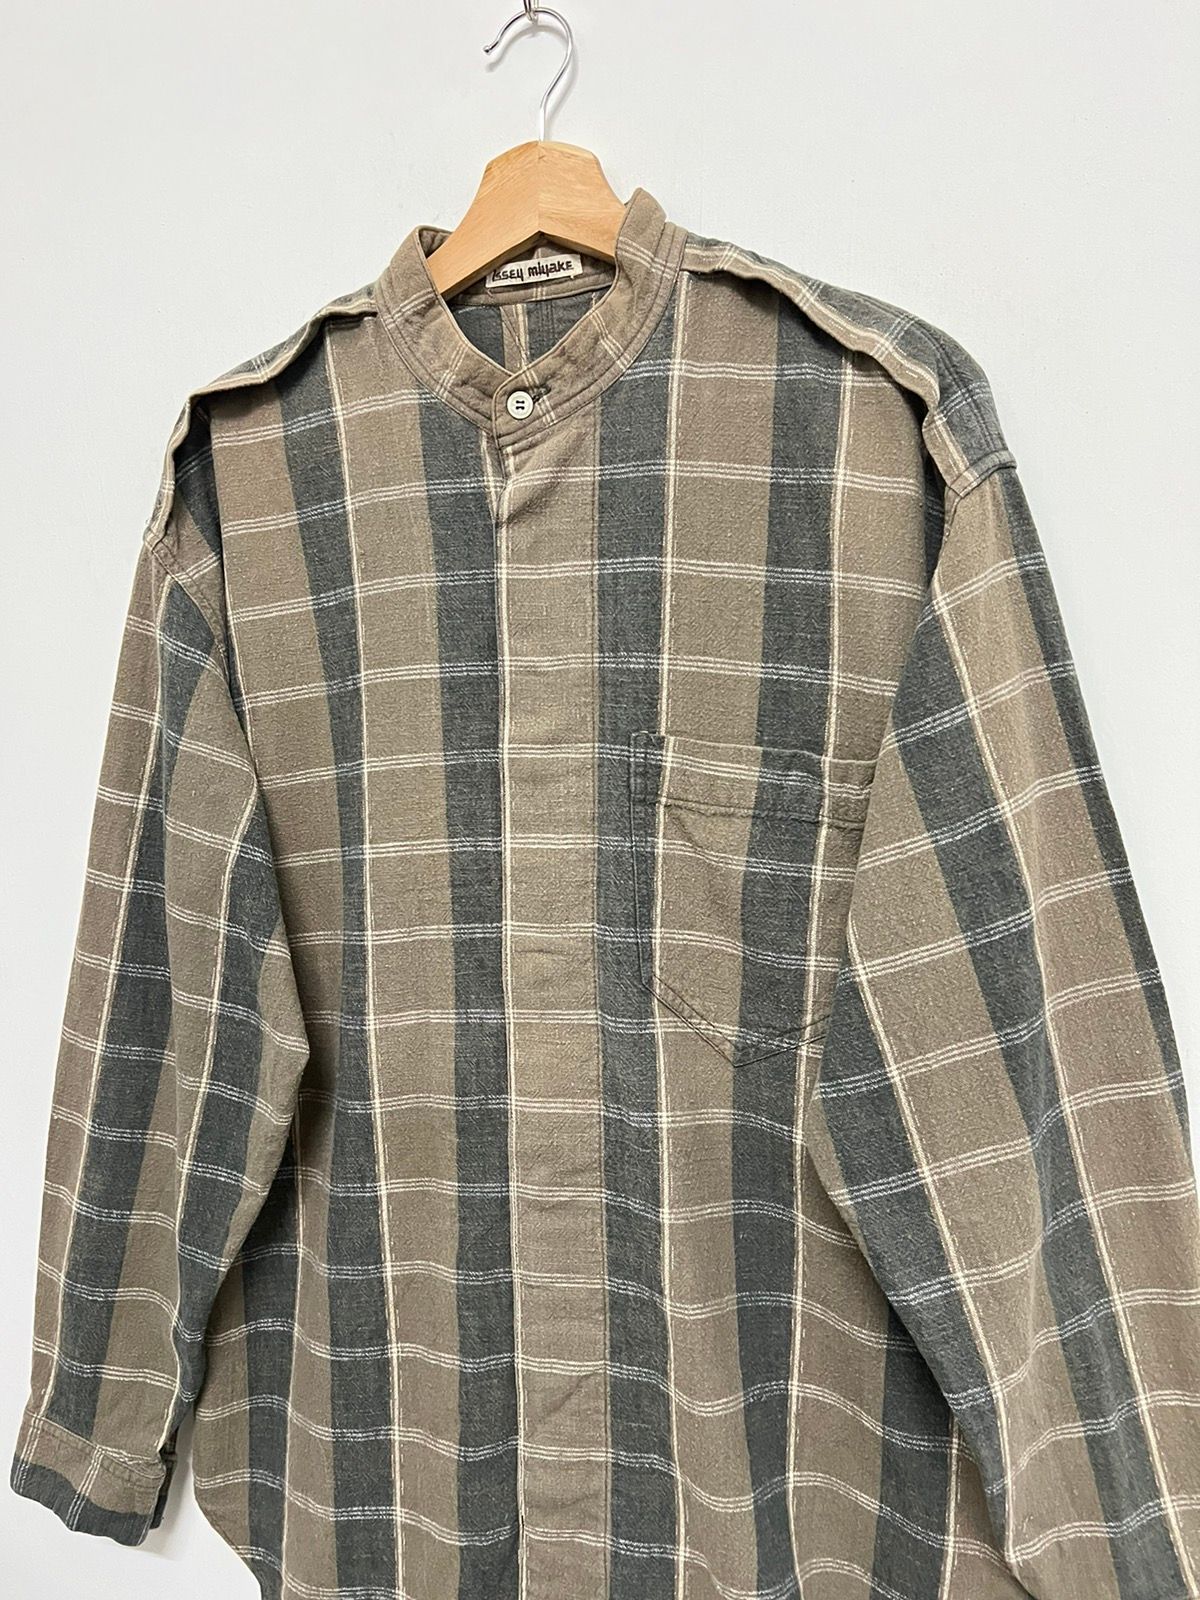 Vintage Issey Miyake Buttons Up Shirt - 2